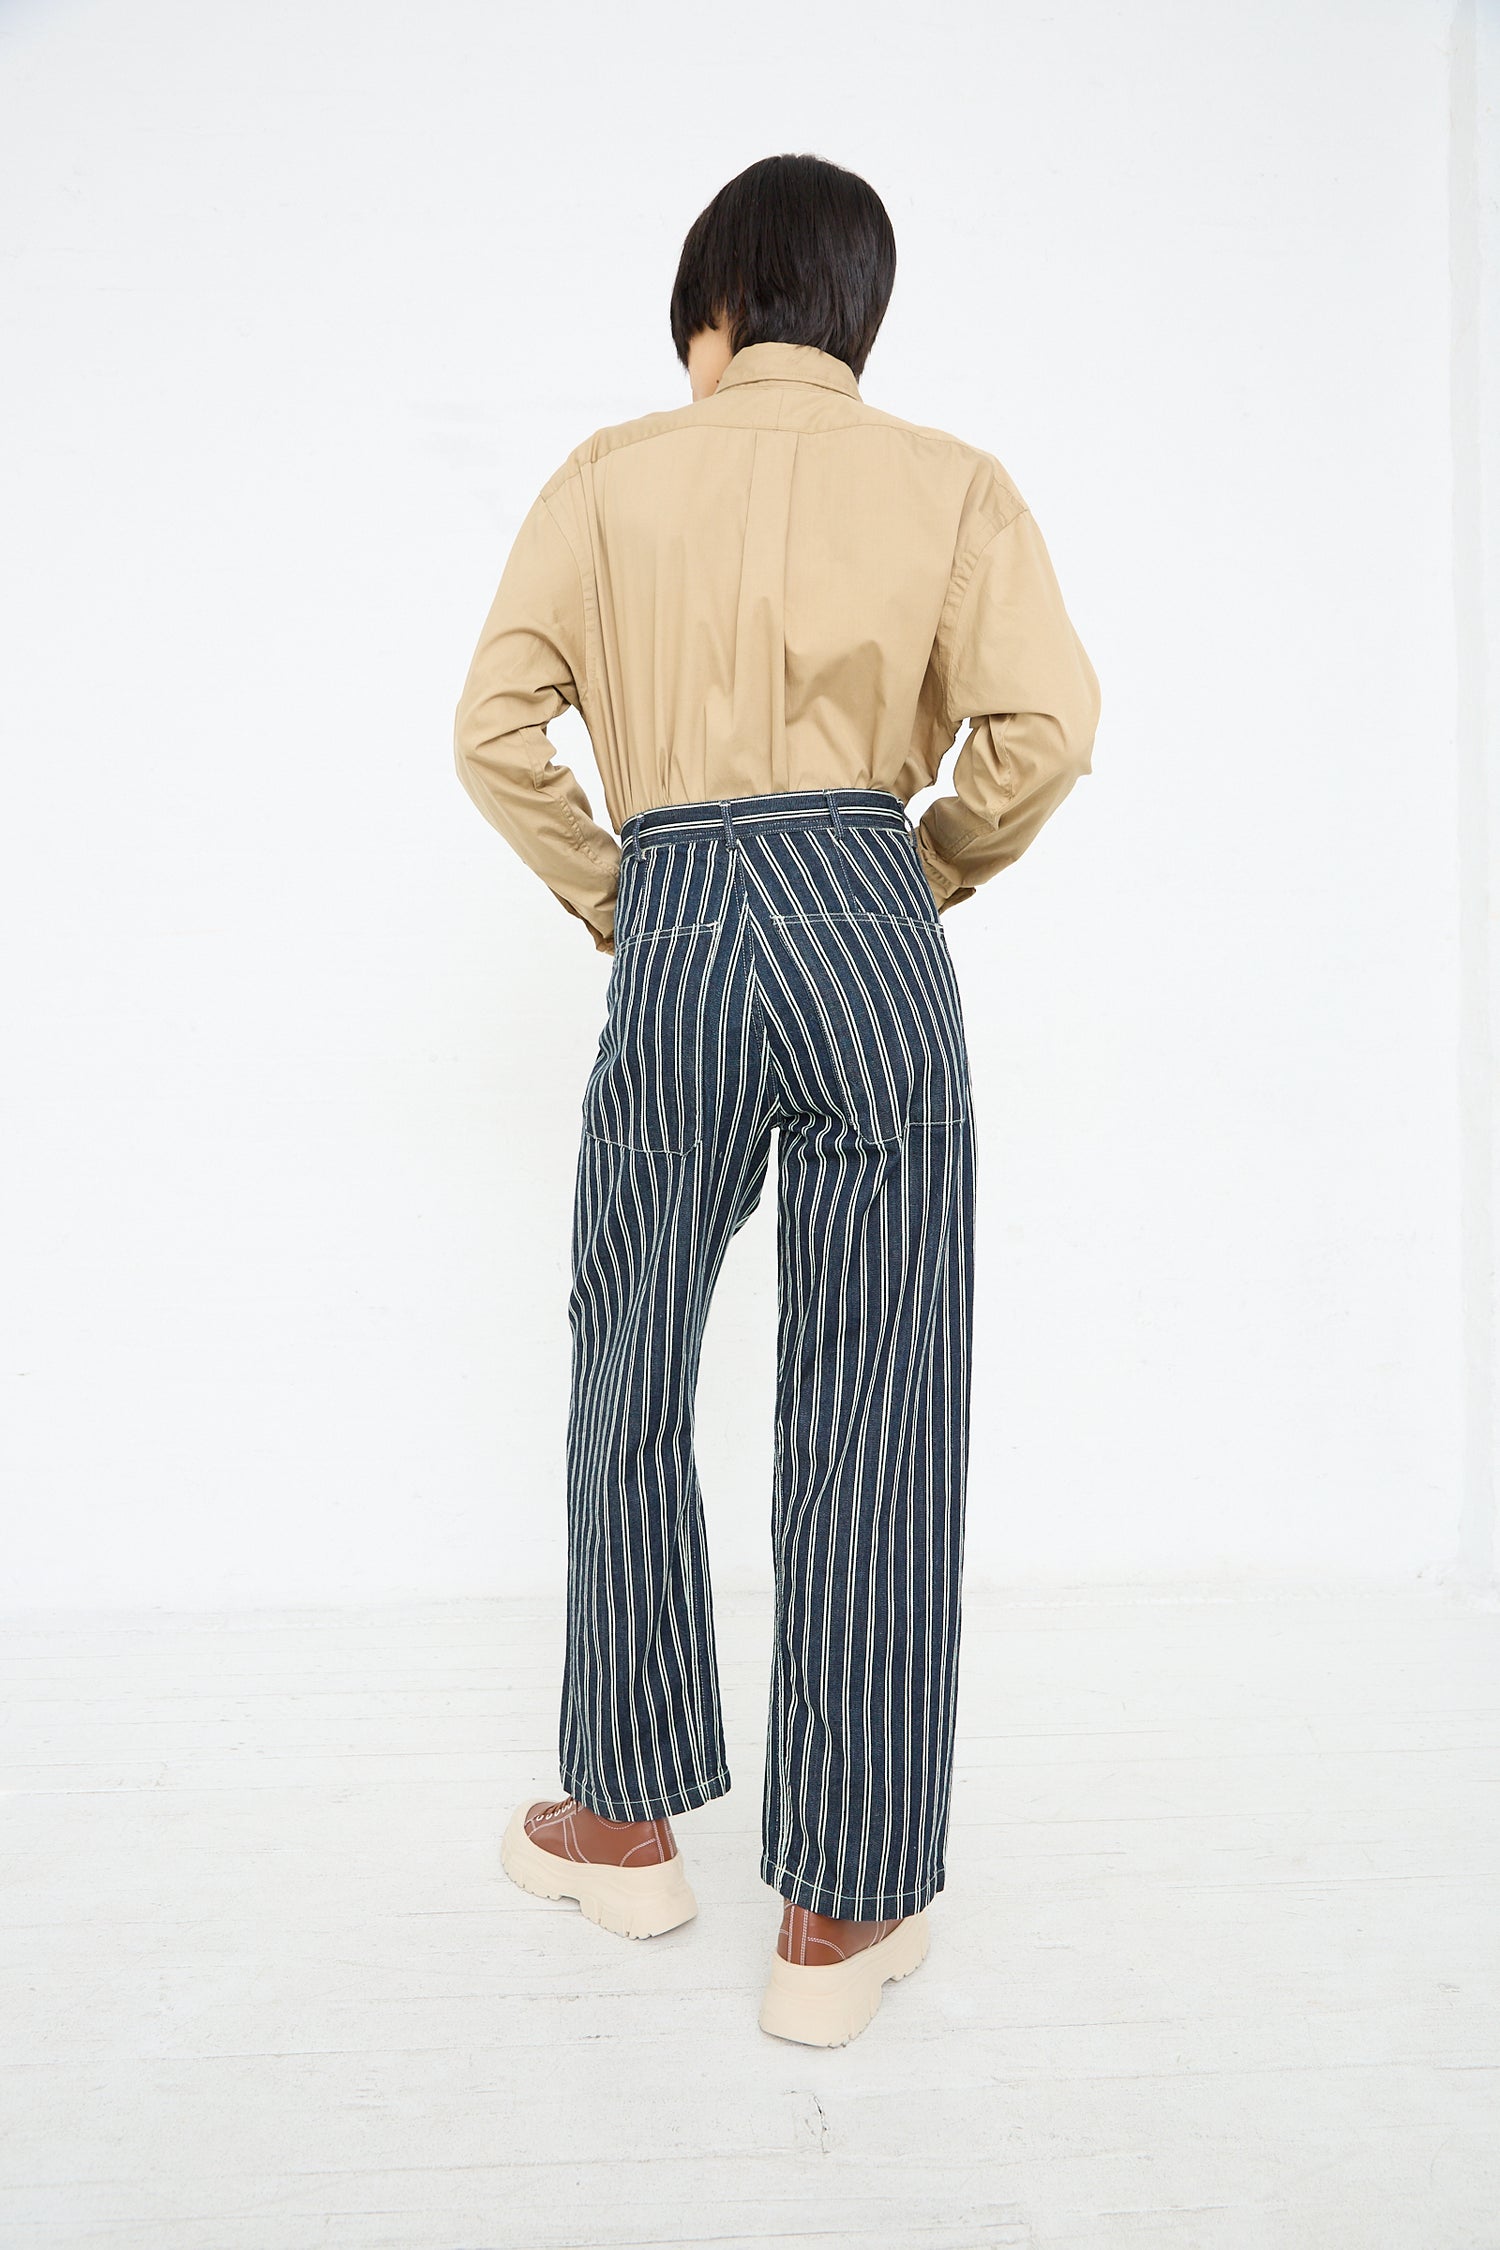 A person standing with their back to the camera, wearing a beige shirt and As Ever's Brancusi Pant in Indigo Denim Stripe trousers, paired with beige shoes, against a white background.